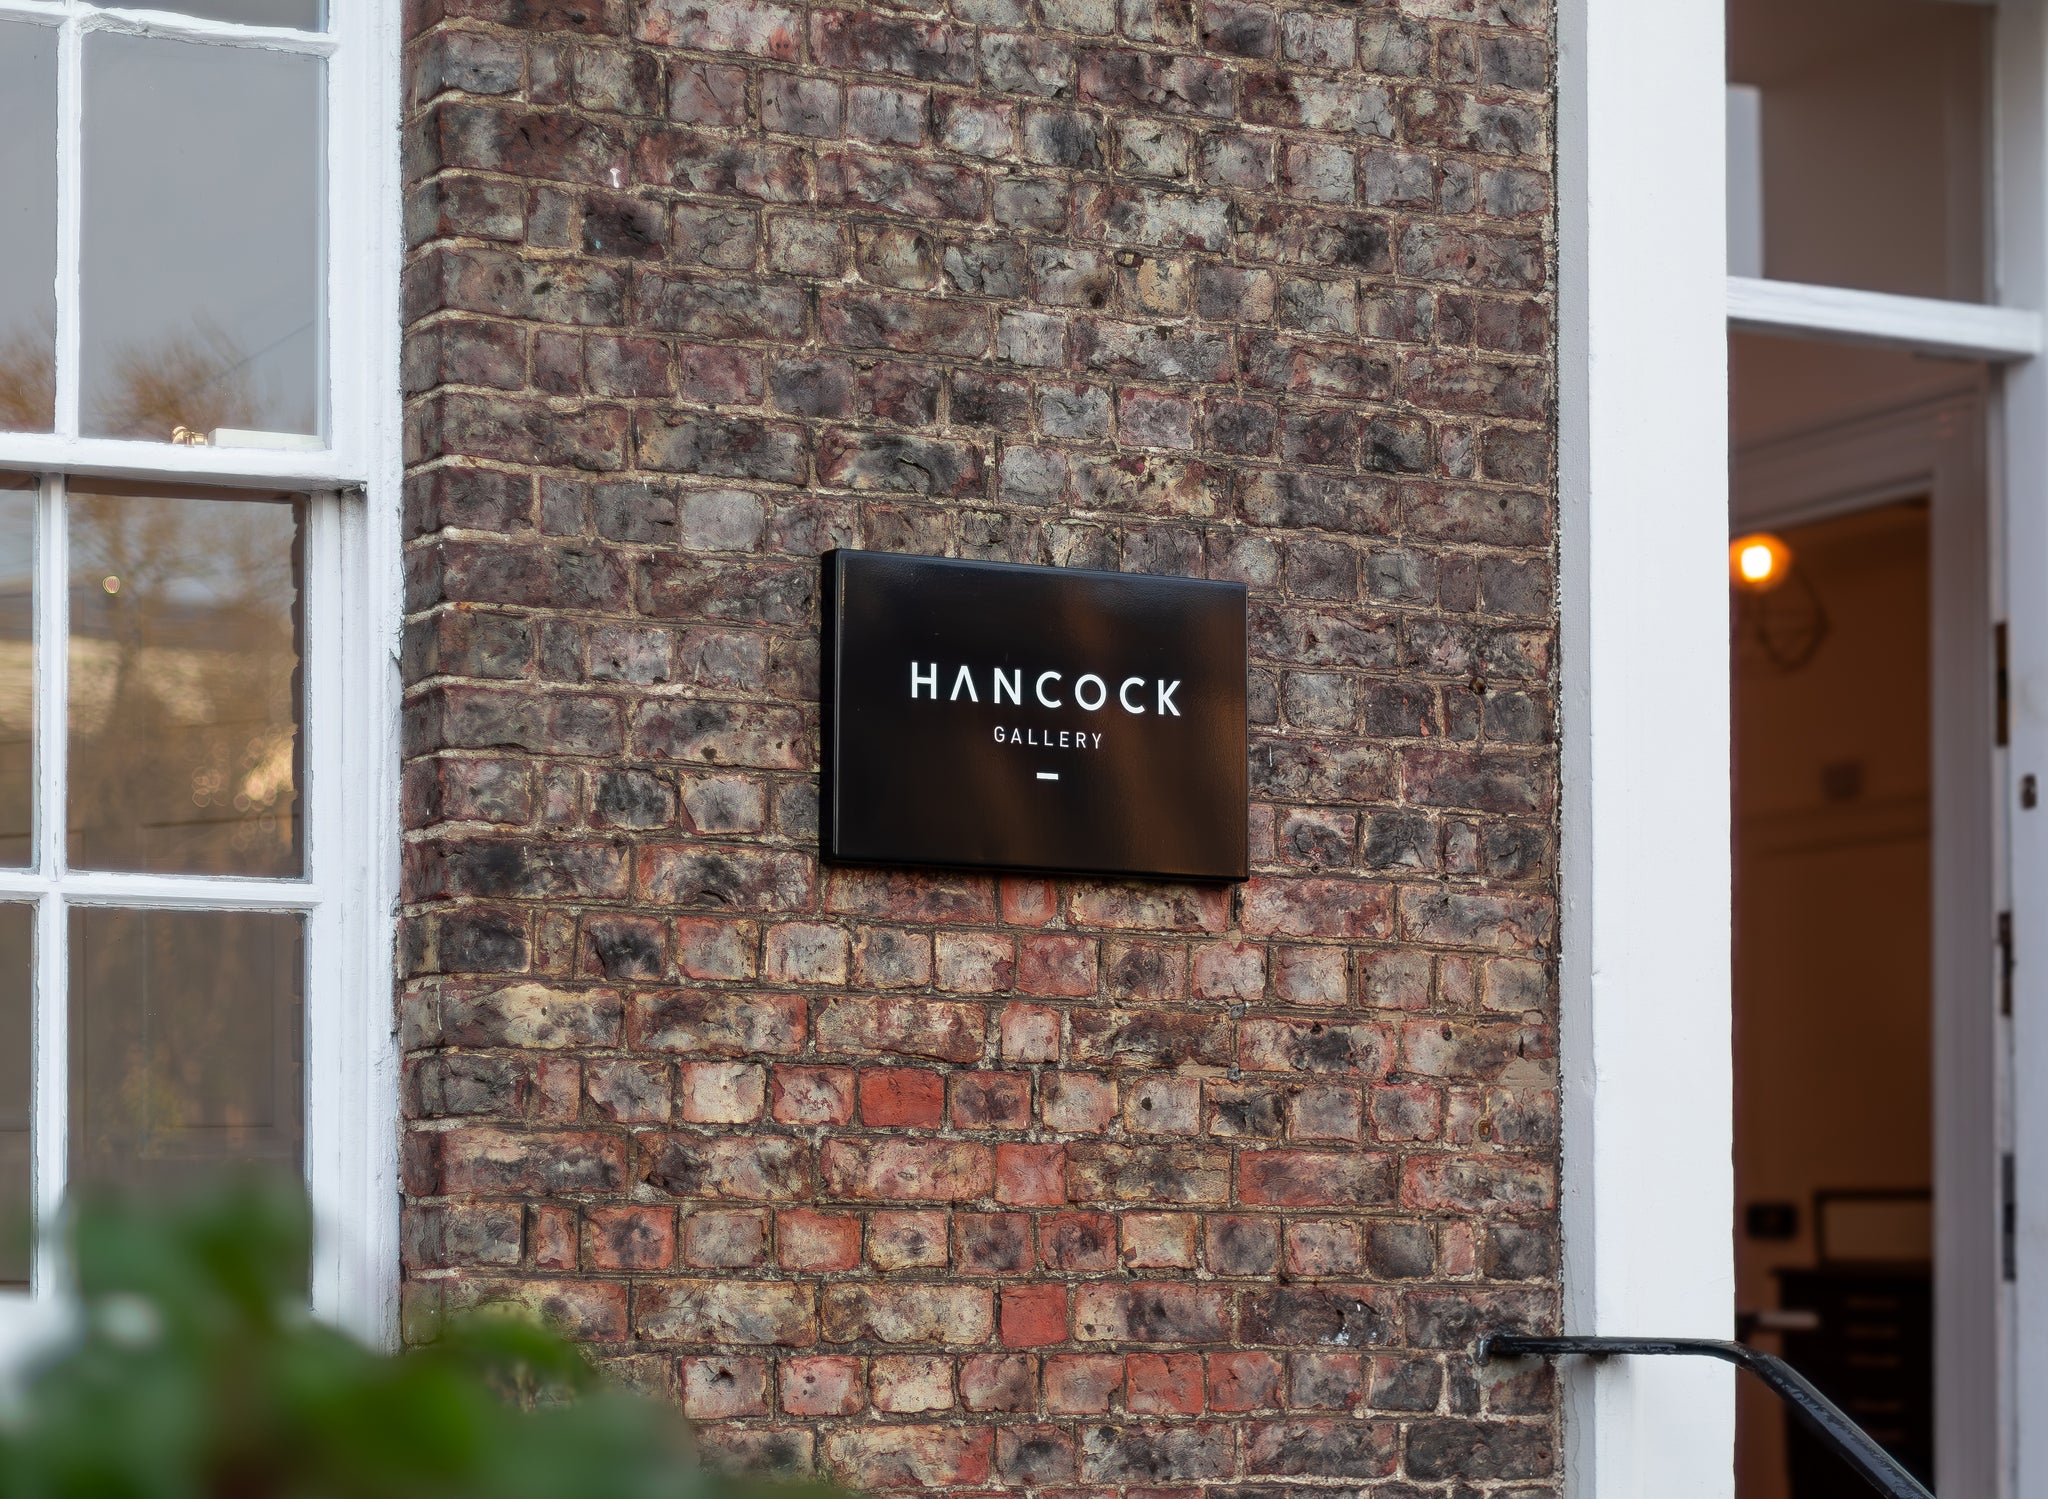 Hancock: A Name Rooted in Natural History